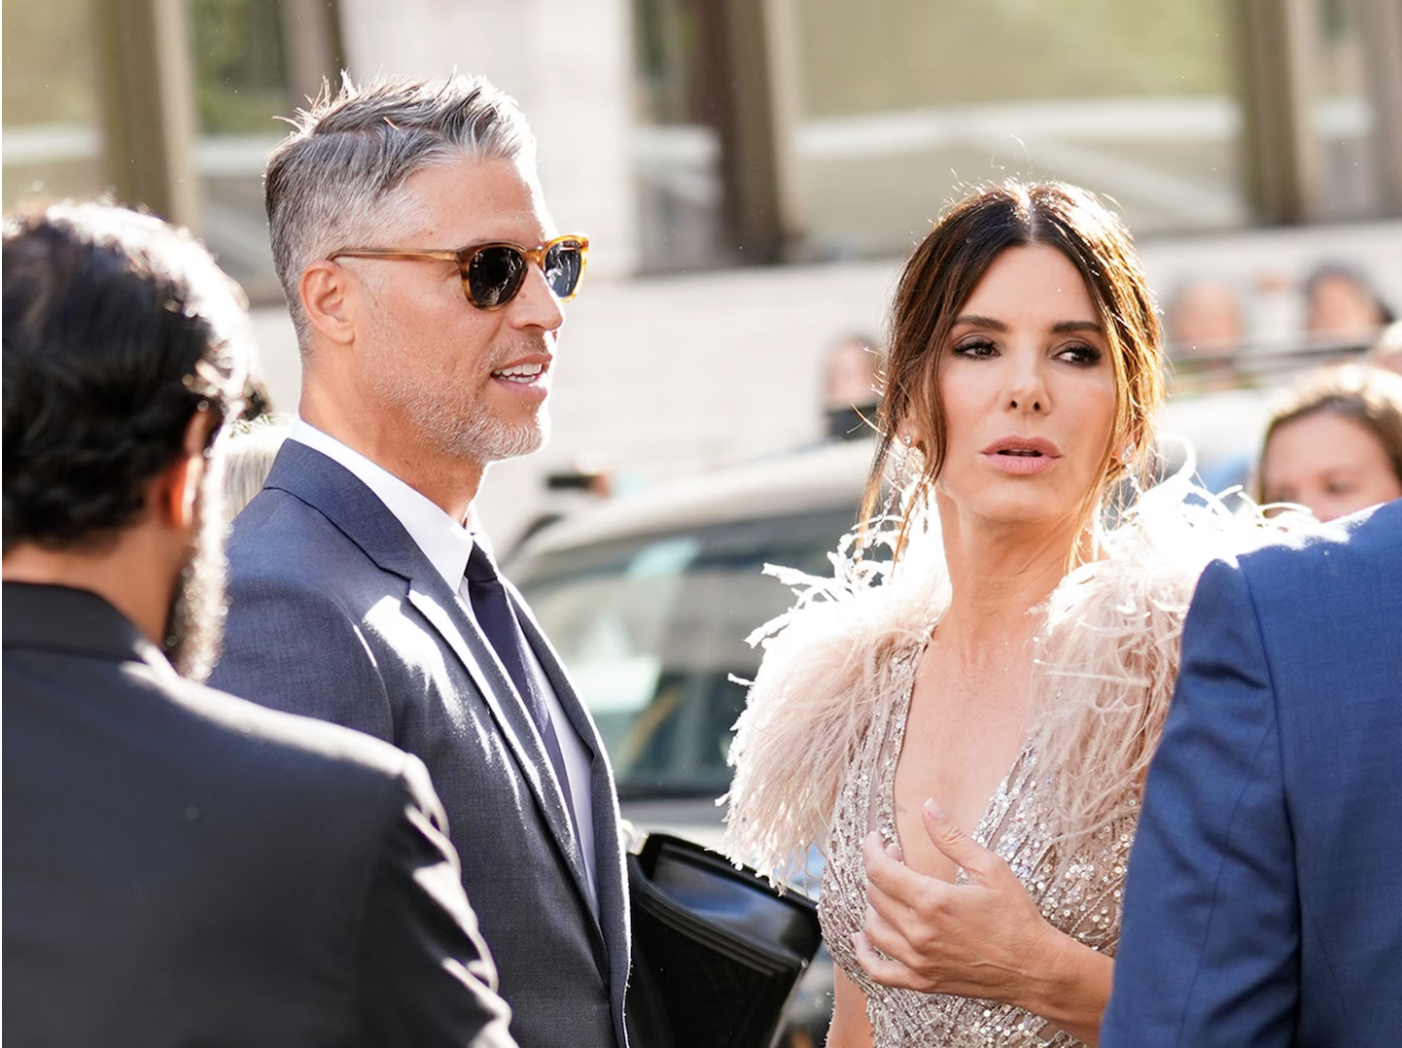 Sandra Bullock’s partner died of ALS. What to know about the rare disease.